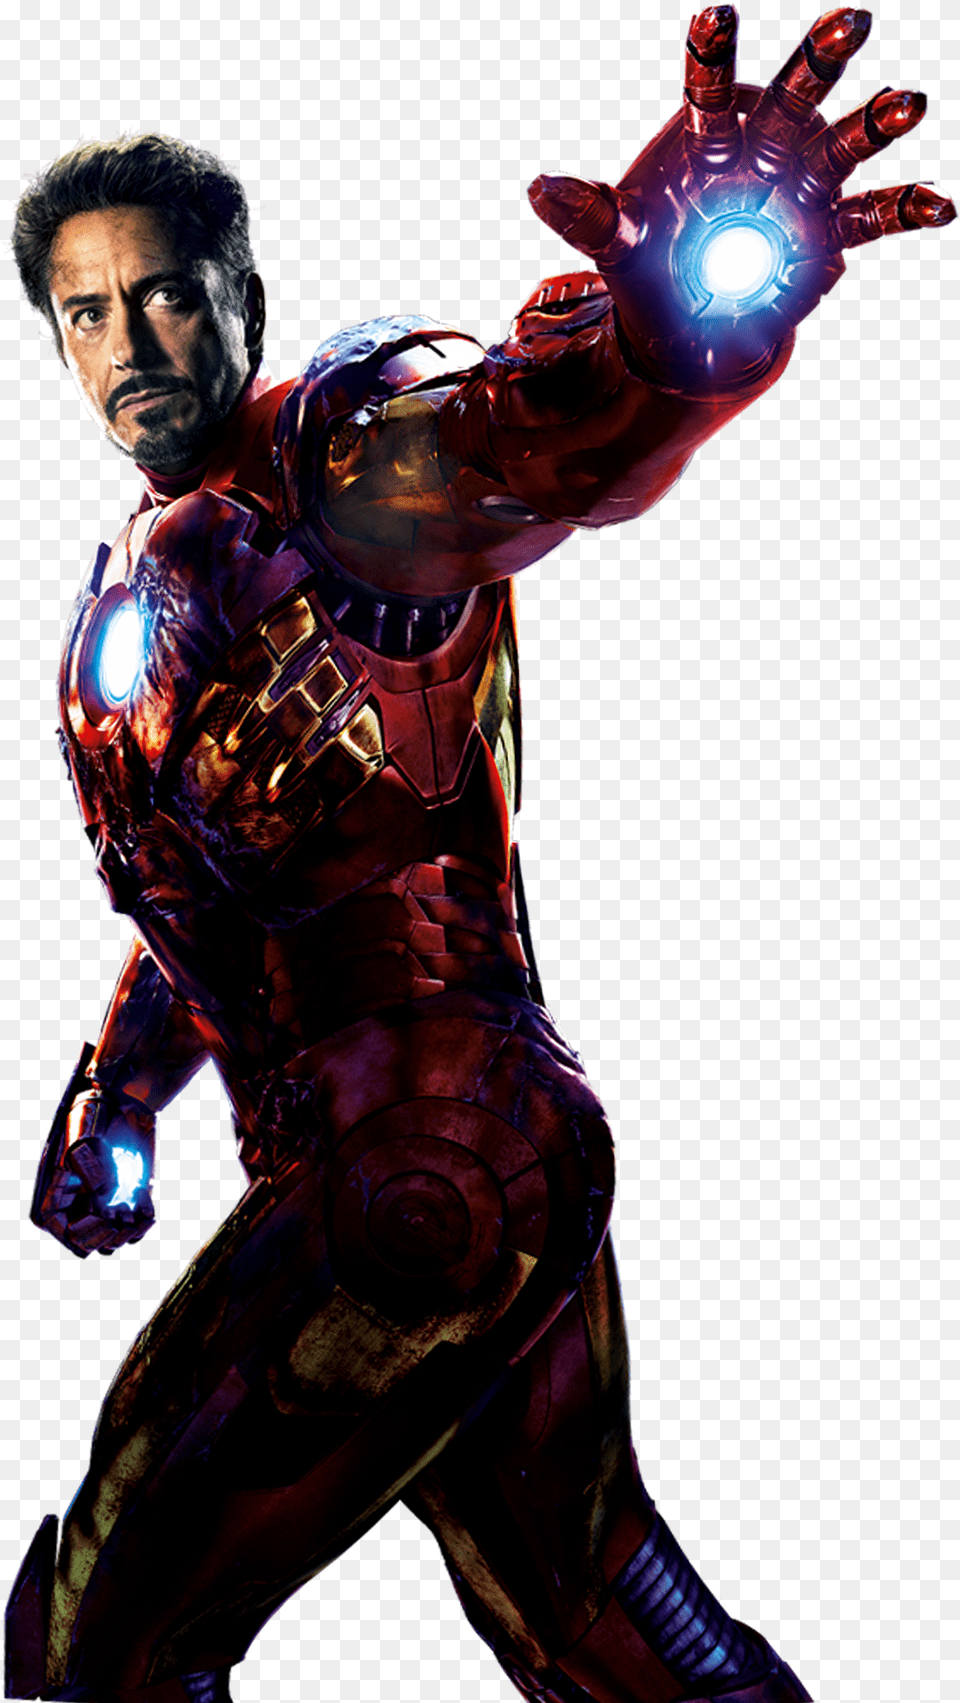 Iron Man Dating Site Avengers Movie Poster Png